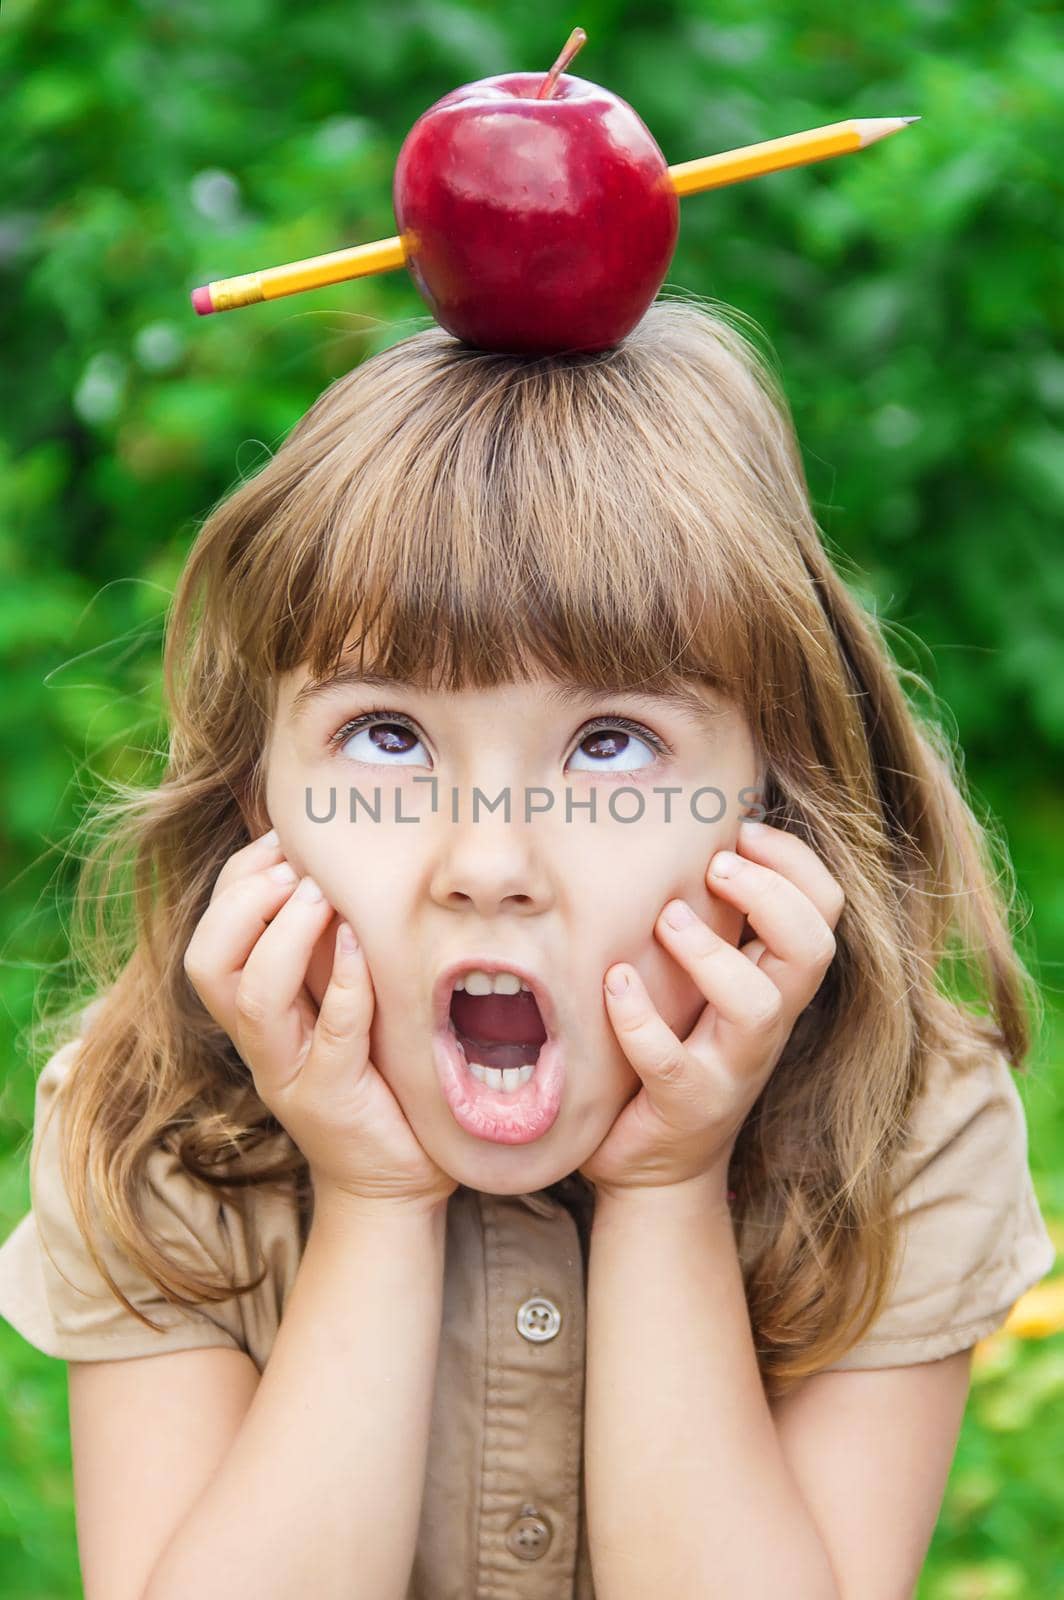 Child student with a red apple. Selective focus. nature.